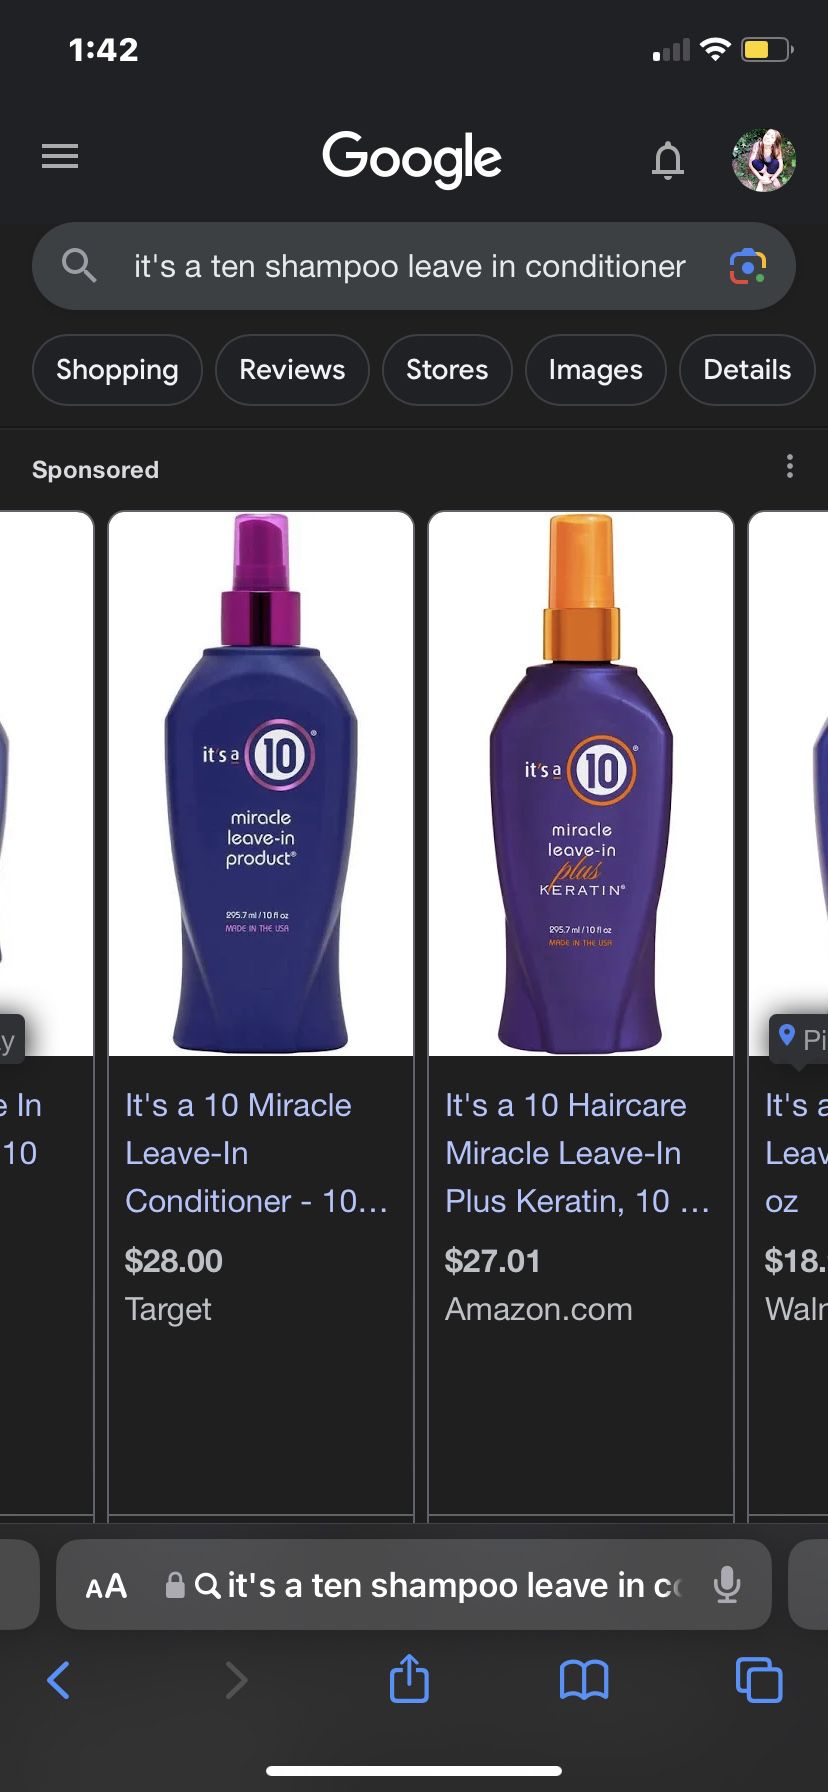 It’s a 10 miracle leave in product 